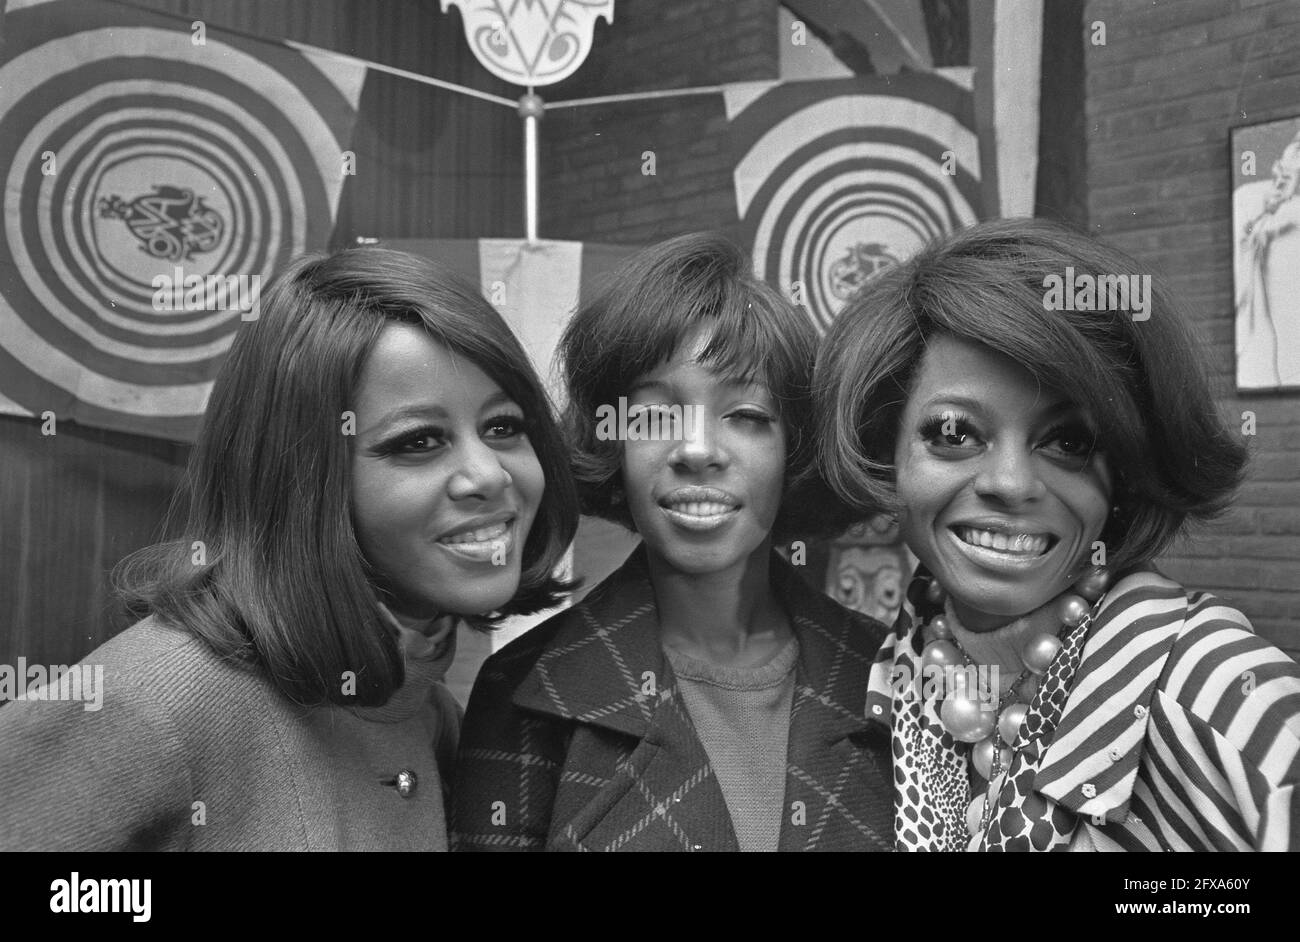 Diana Ross and The Supremes during press conference at Hilton Hotel in Amsterdam, left to right Cindy Birdsong, Mary Wilson and Diana Ross, January 15, 1968, press conferences, The Netherlands, 20th century press agency photo, news to remember, documentary, historic photography 1945-1990, visual stories, human history of the Twentieth Century, capturing moments in time Stock Photo